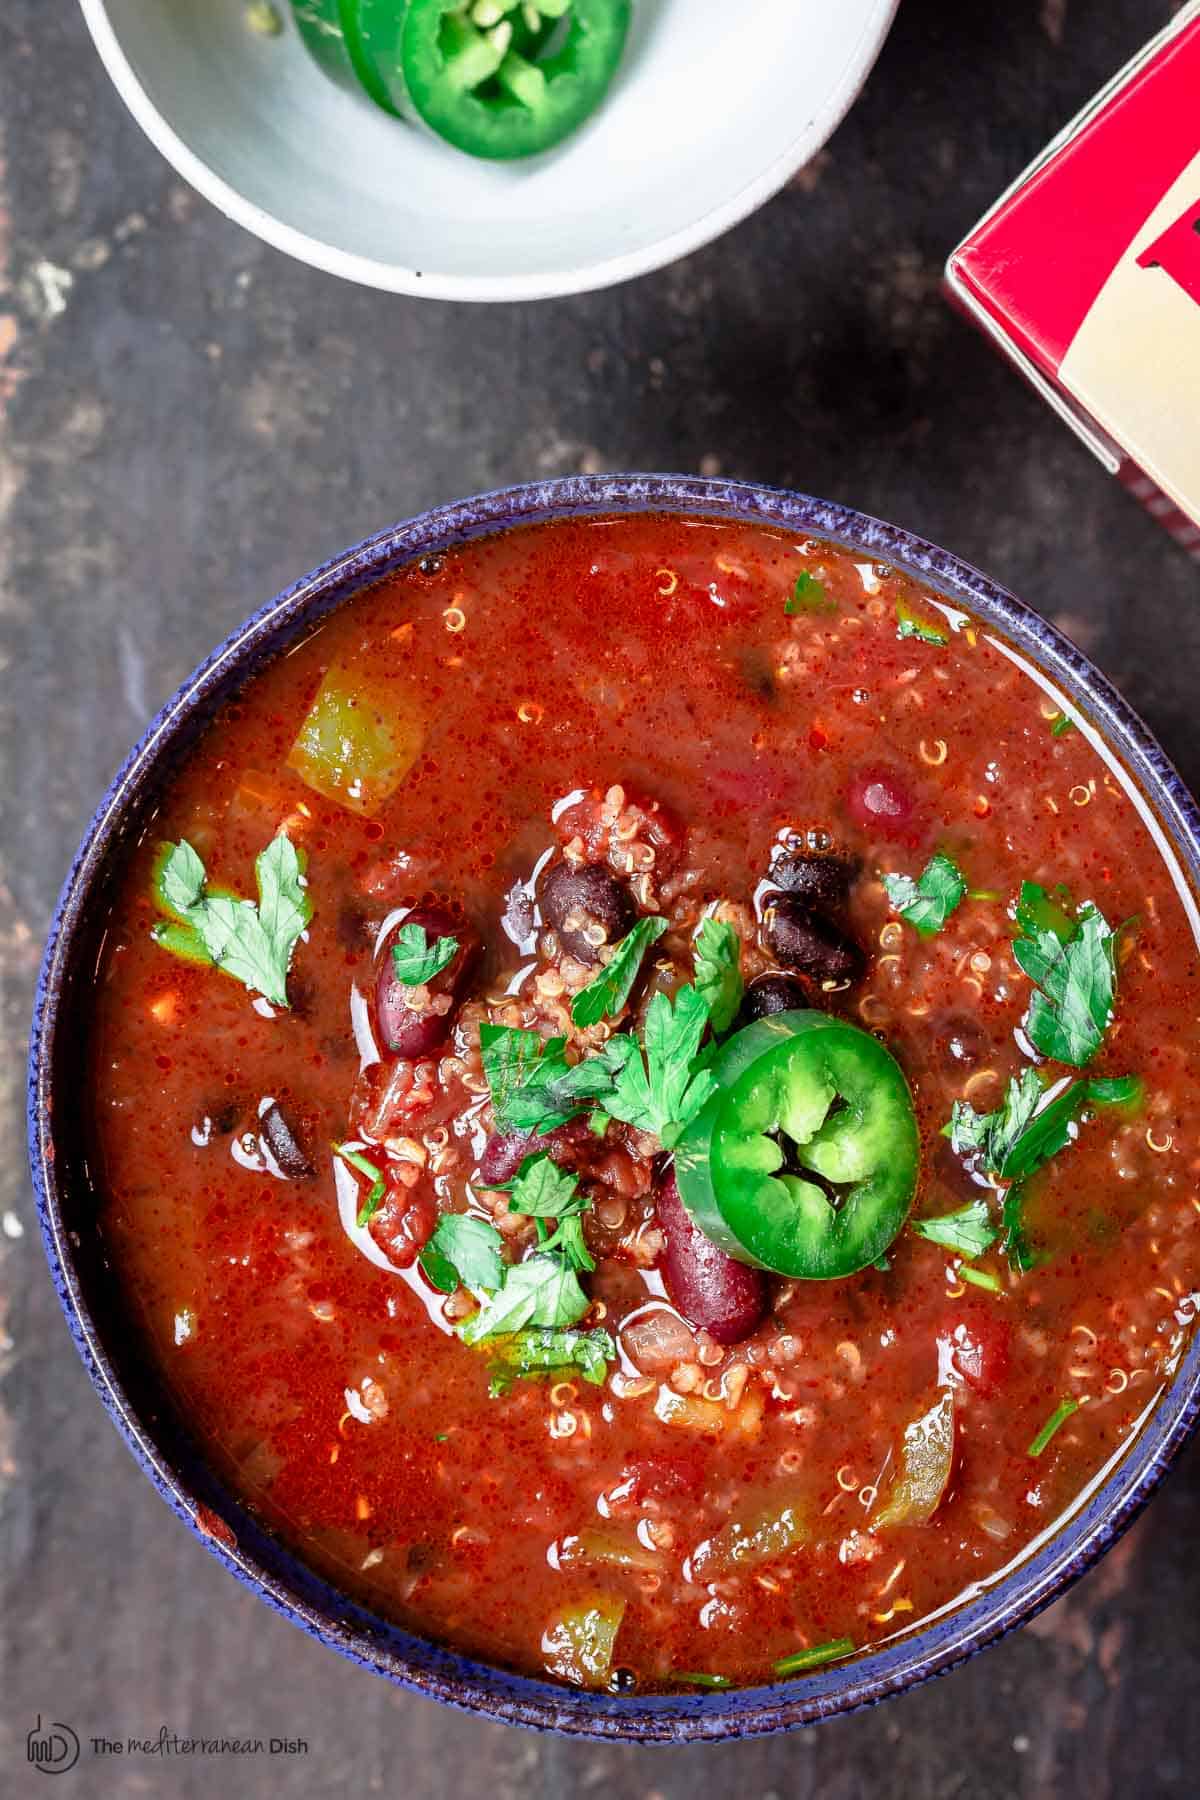 Vegan chili in a bowl with quinoa and jalapenos